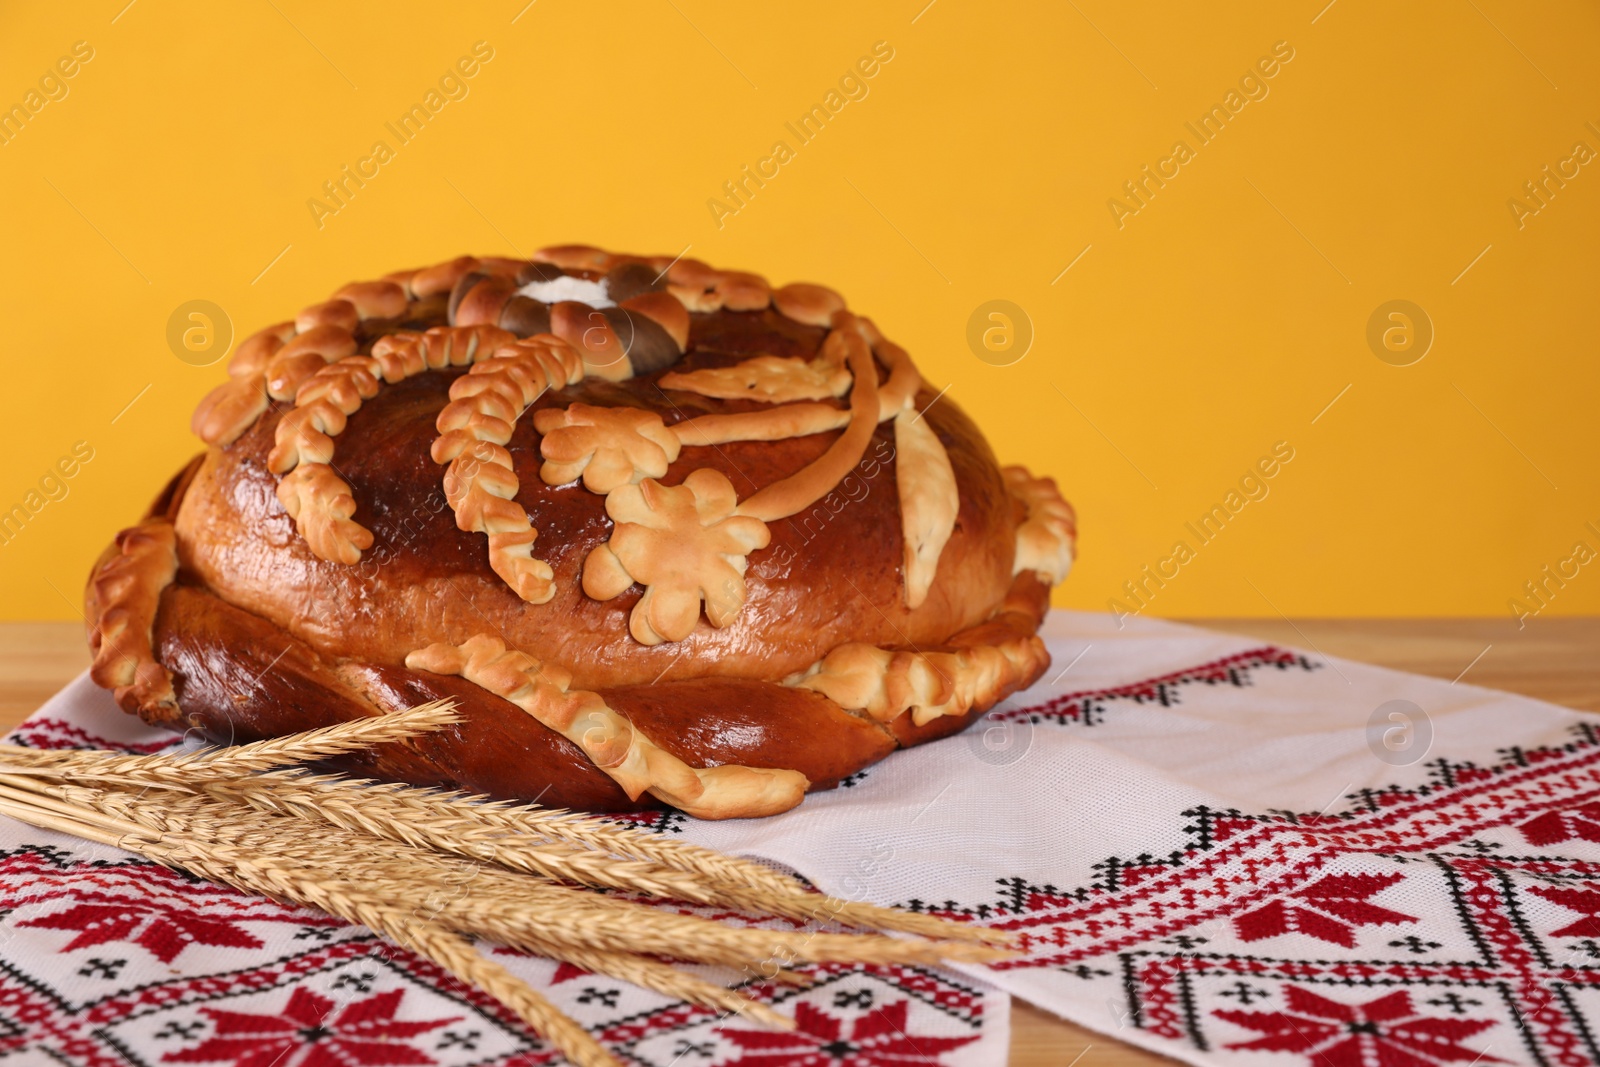 Photo of Rushnyk with korovai, wheat spikes on yellow background. Ukrainian bread and salt welcoming tradition